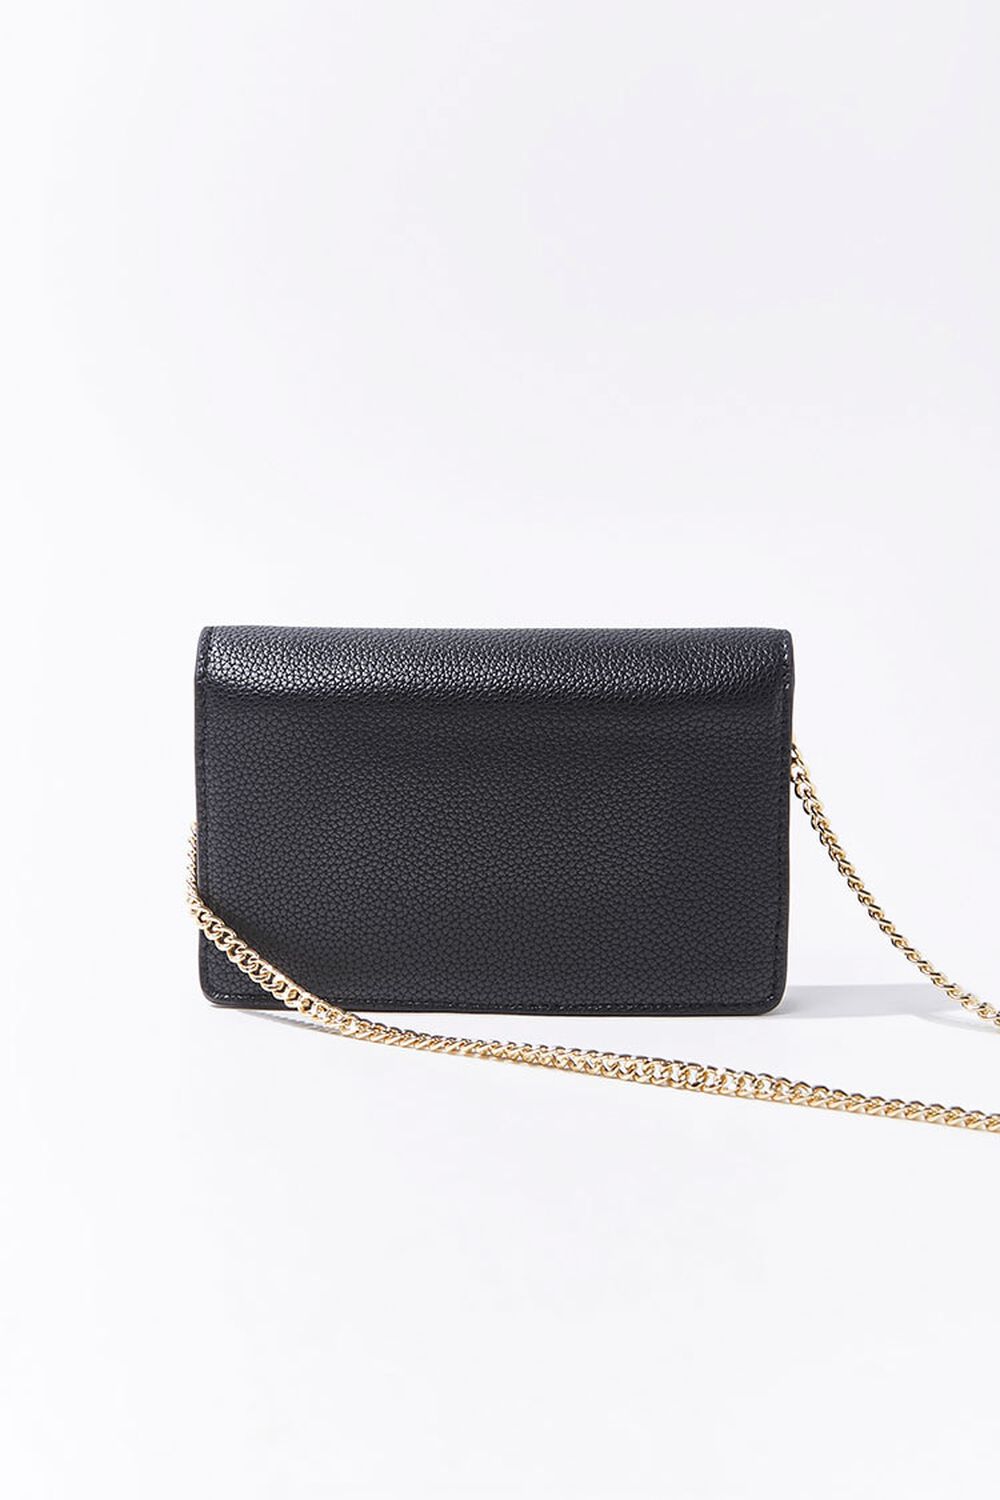 Pebbled Faux Leather Crossbody Bag, image 1